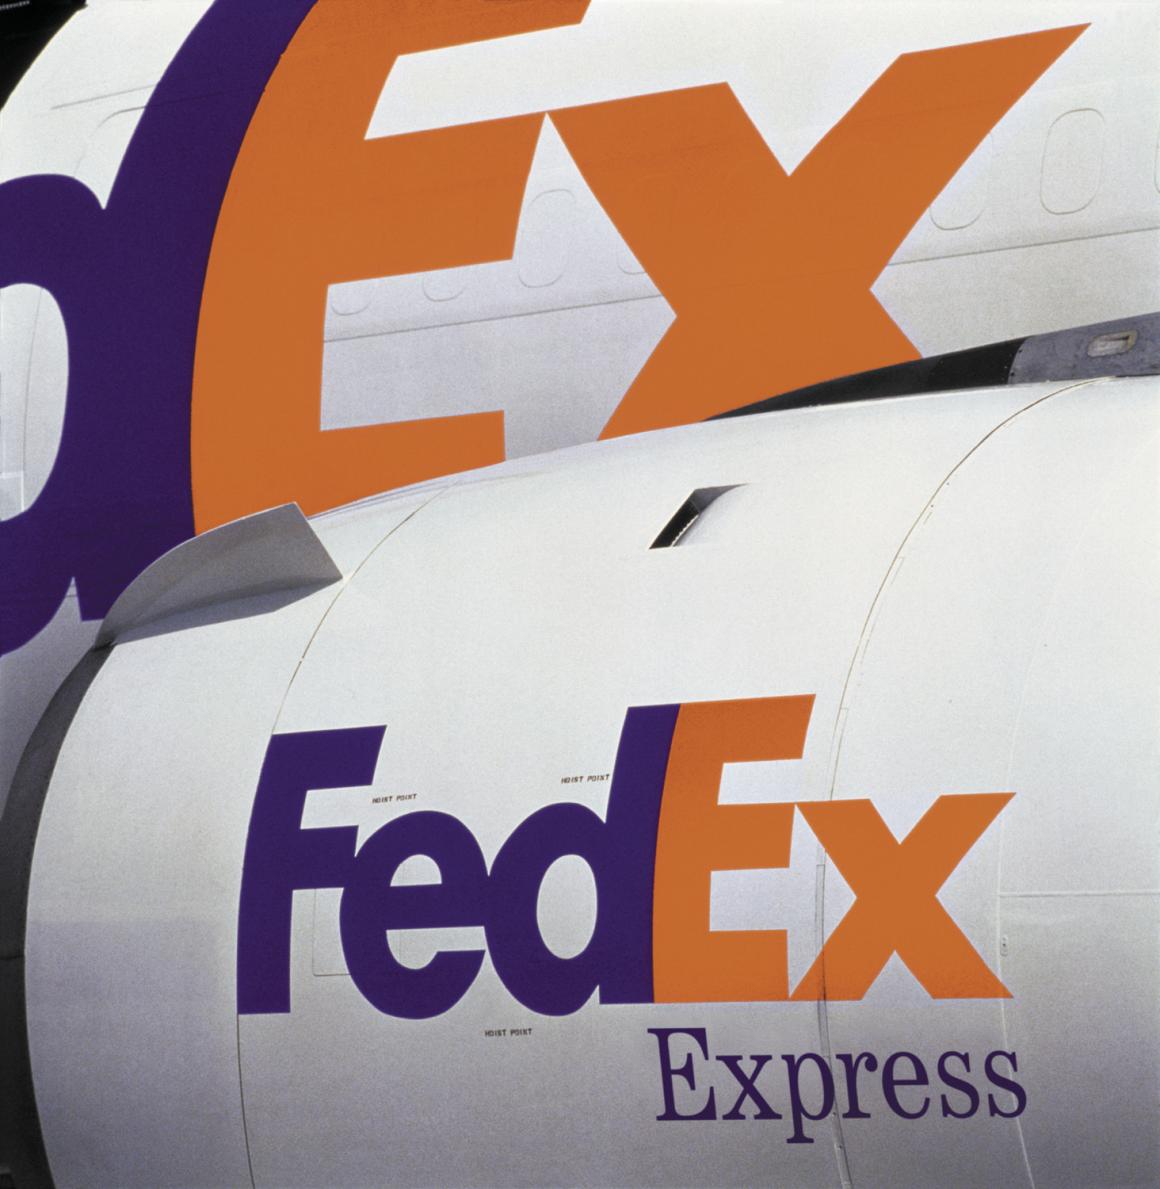 Photo of FedEx Express logo on the side of an airplane